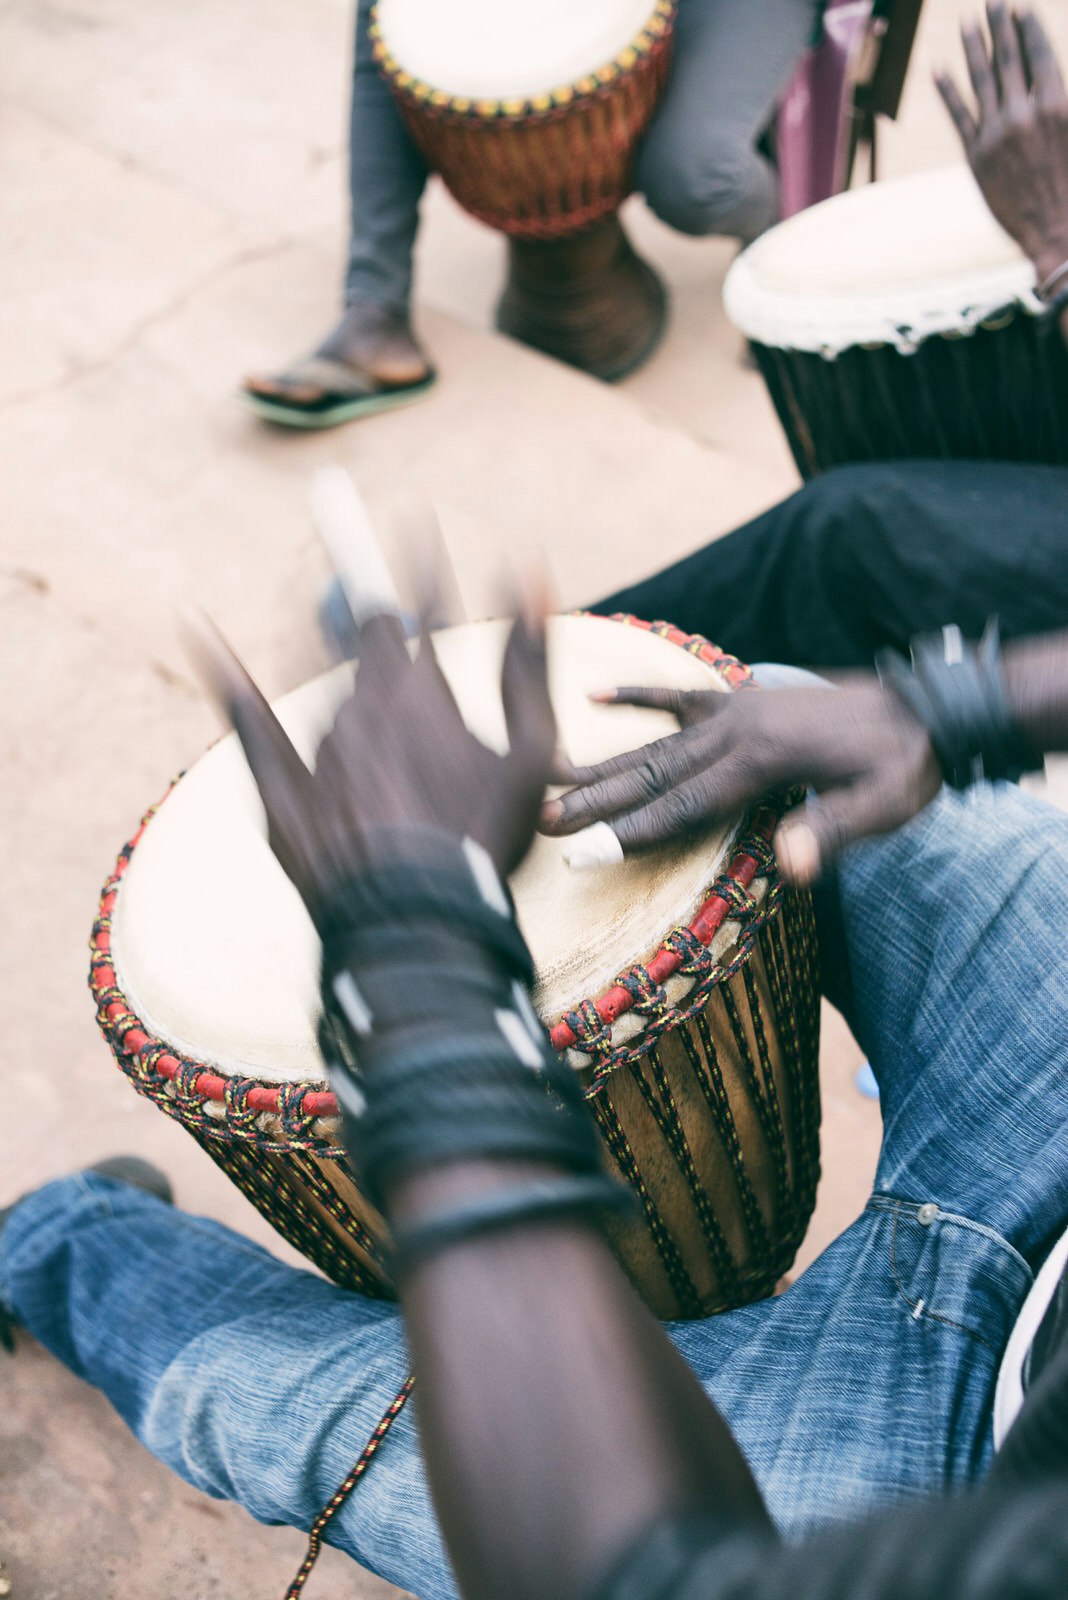 A pair of blurred hands play a djembe that is held between the musician's legs; he's wearing blue jeans.